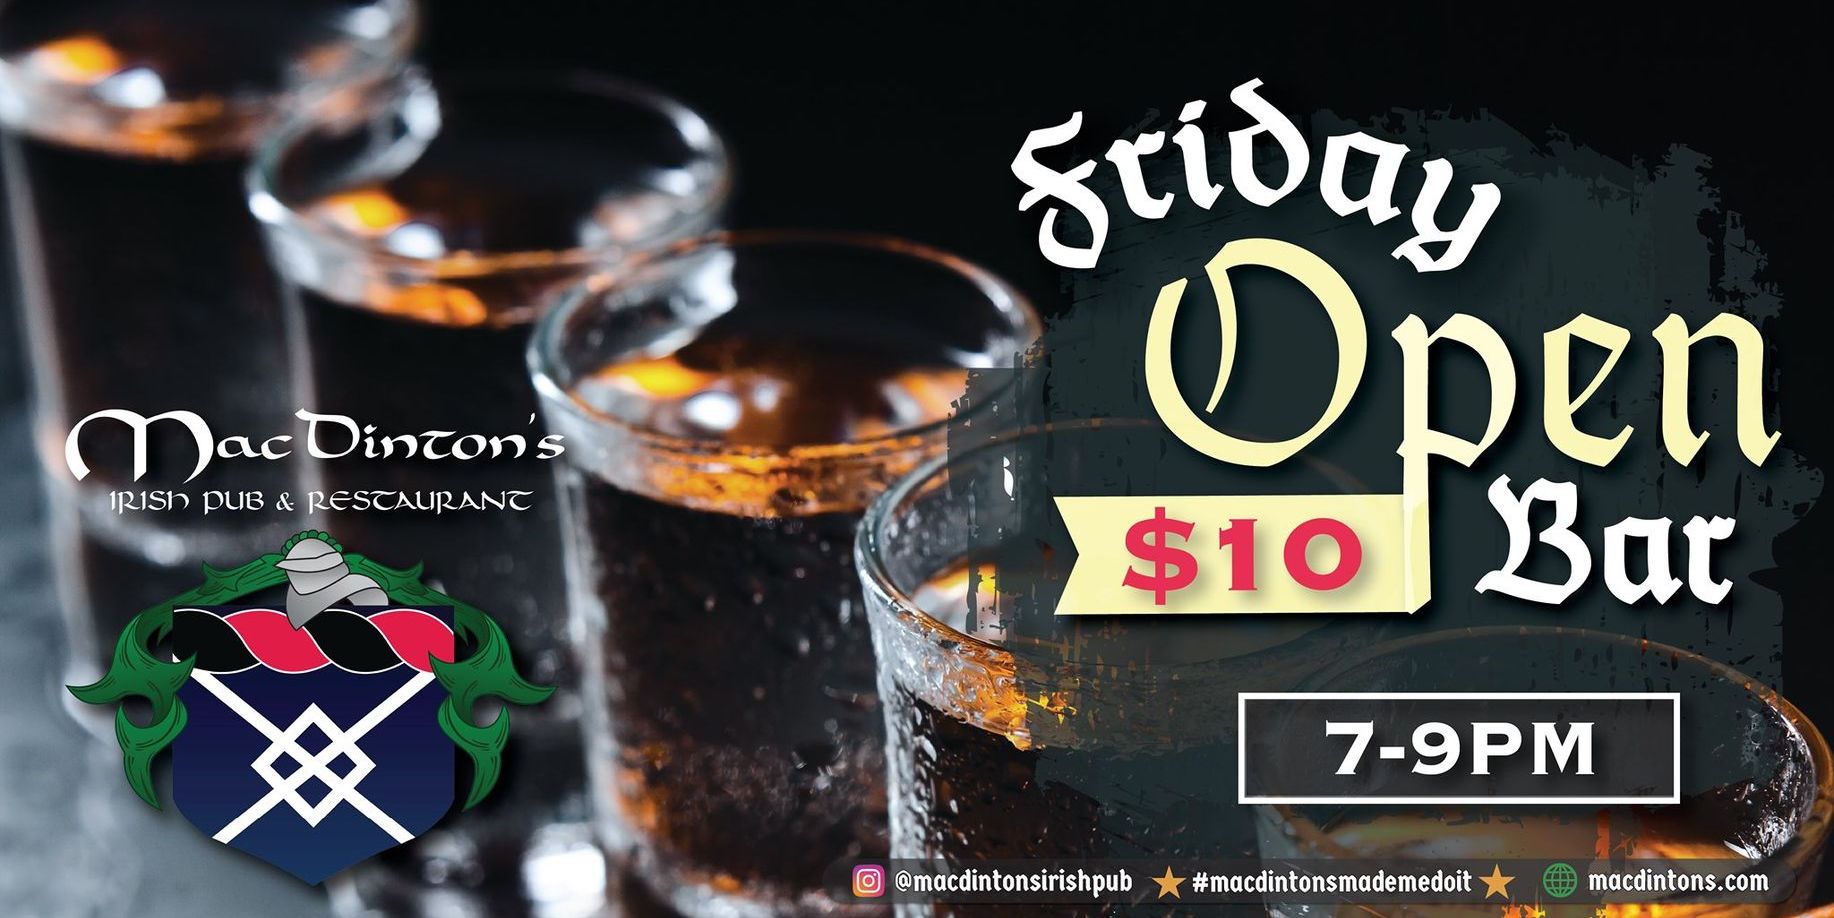 $10 Happy Hour promotional image